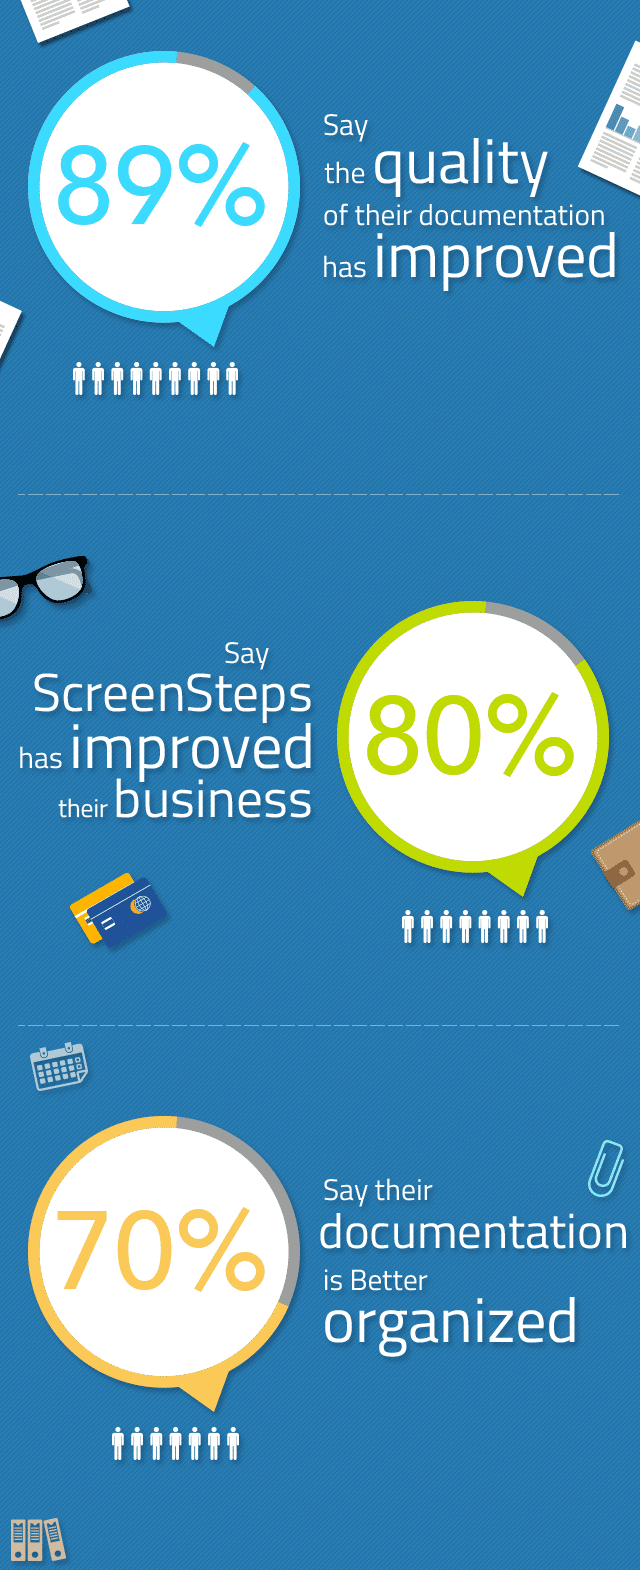 ScreenSteps is Making an Impact (Customer Survey Results)